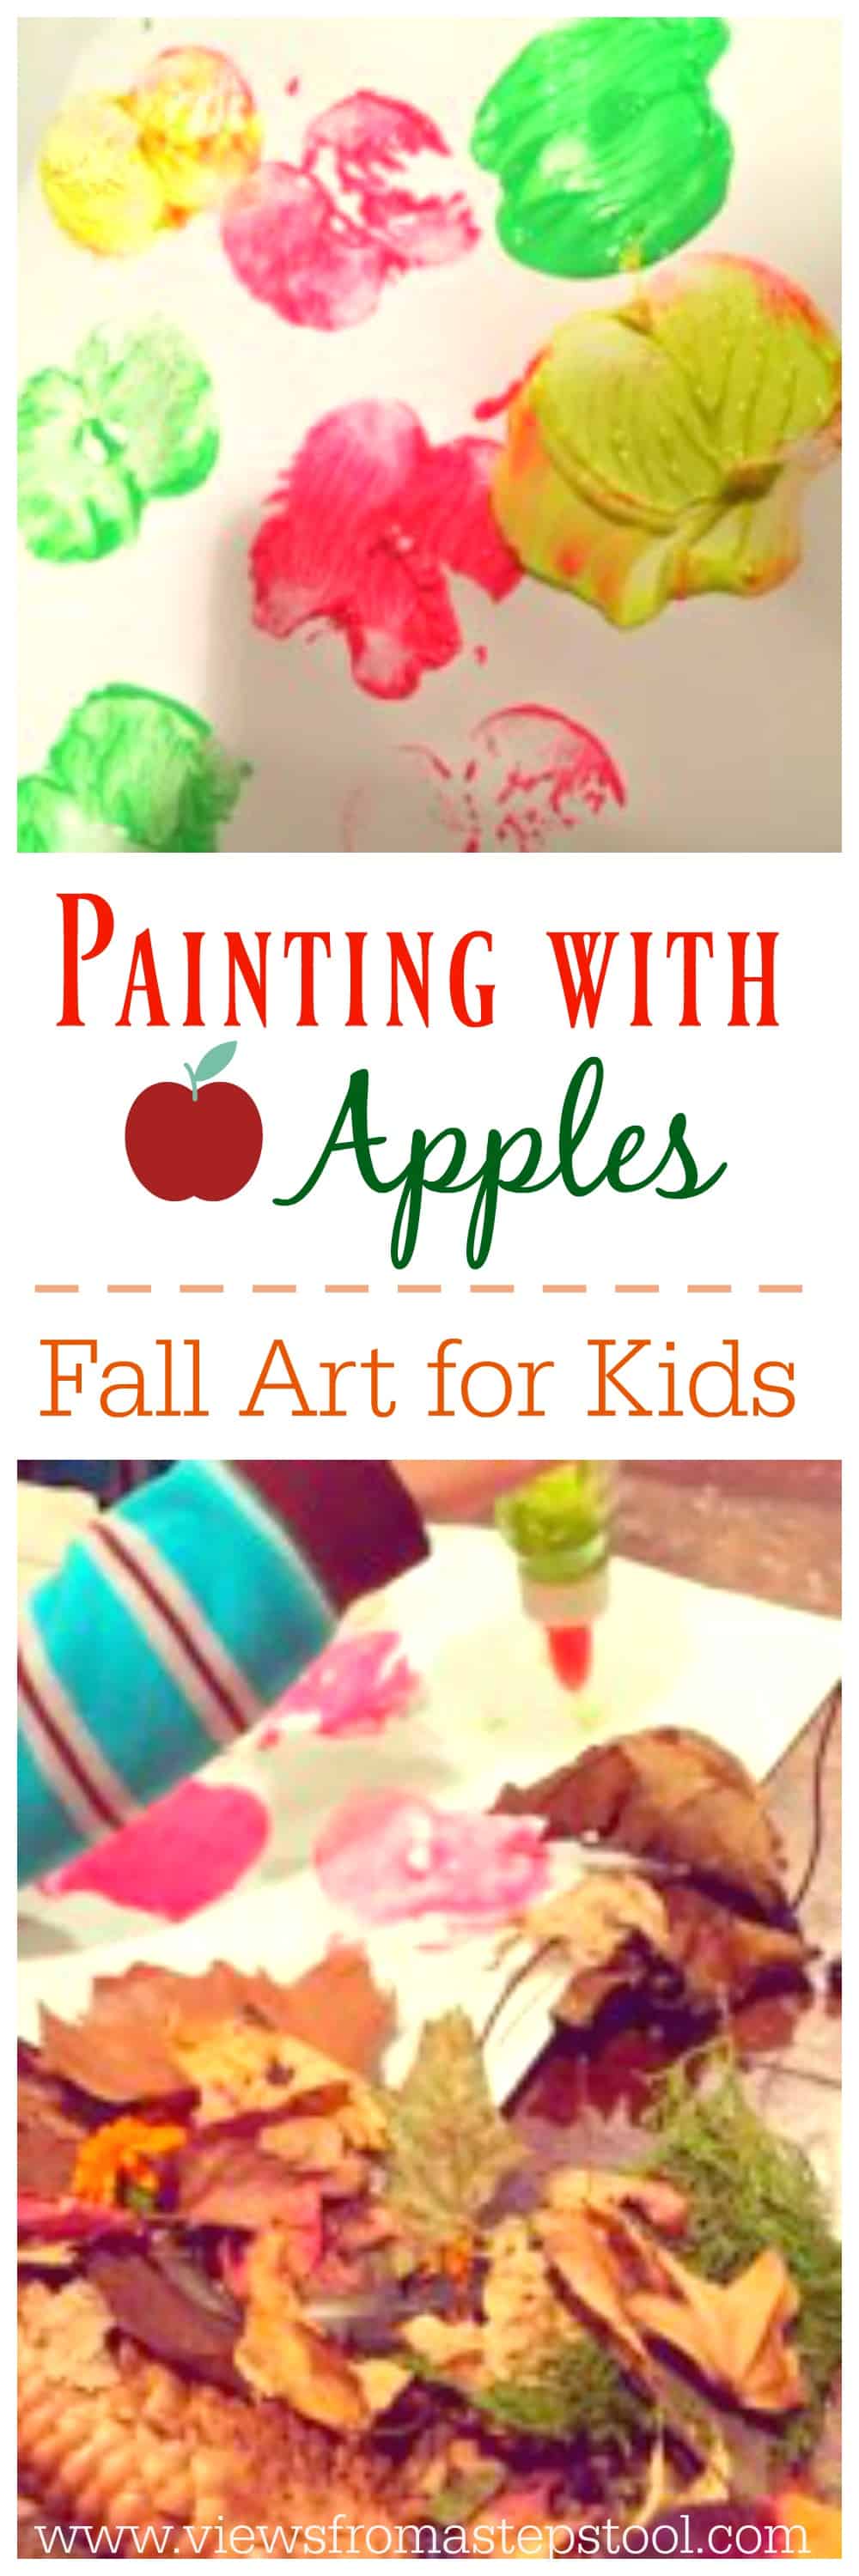 Painting with Apples: A Fun, Fall Art Project